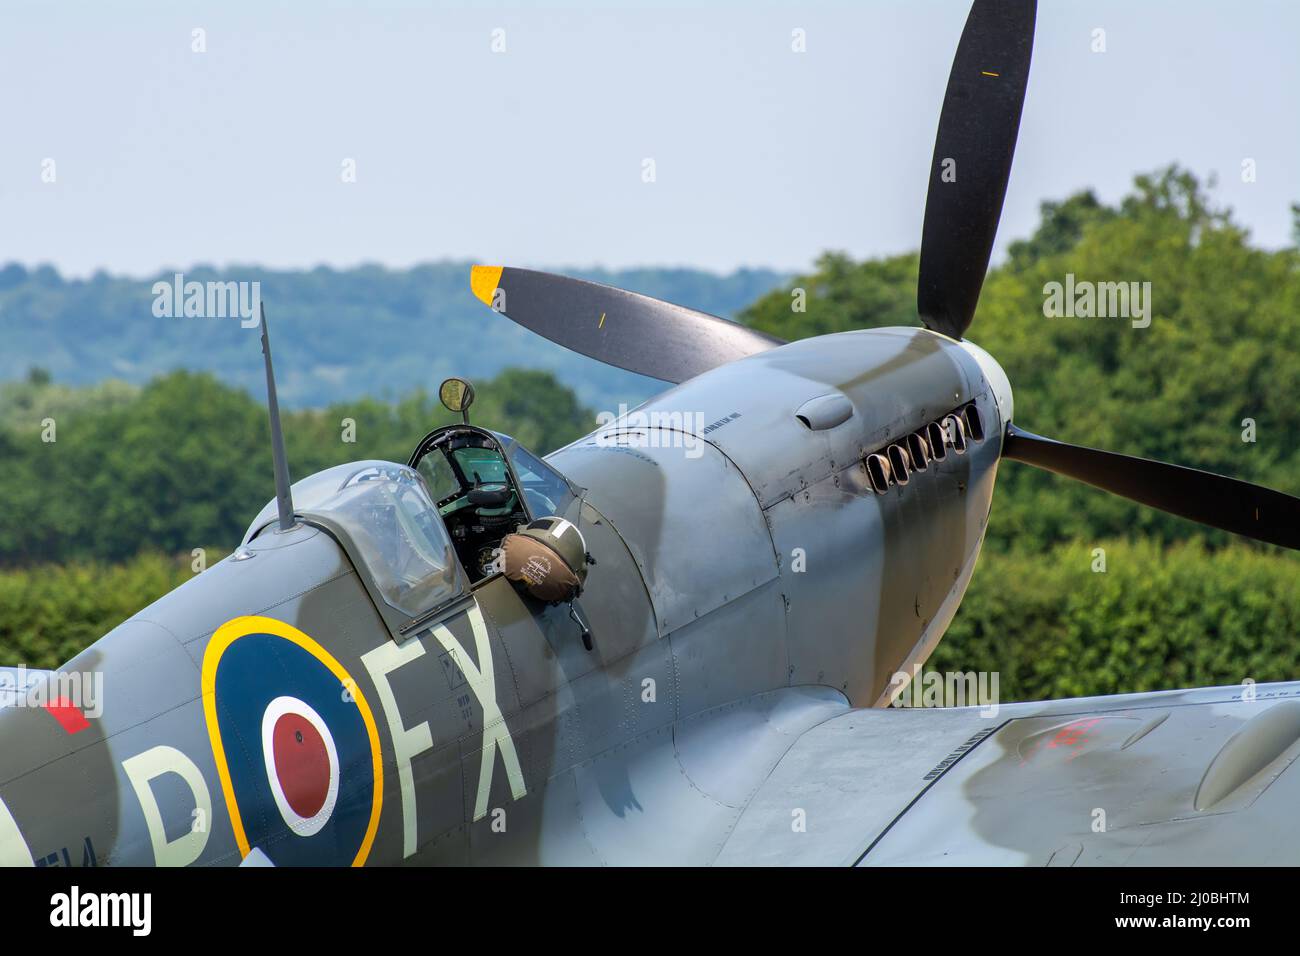 Headcorn, Kent  UK - July 1st 2018 Royal Air Force ground crew do pre-flight checks and prepare a group of spitfire WW2 fighter planes for takeoff. Stock Photo